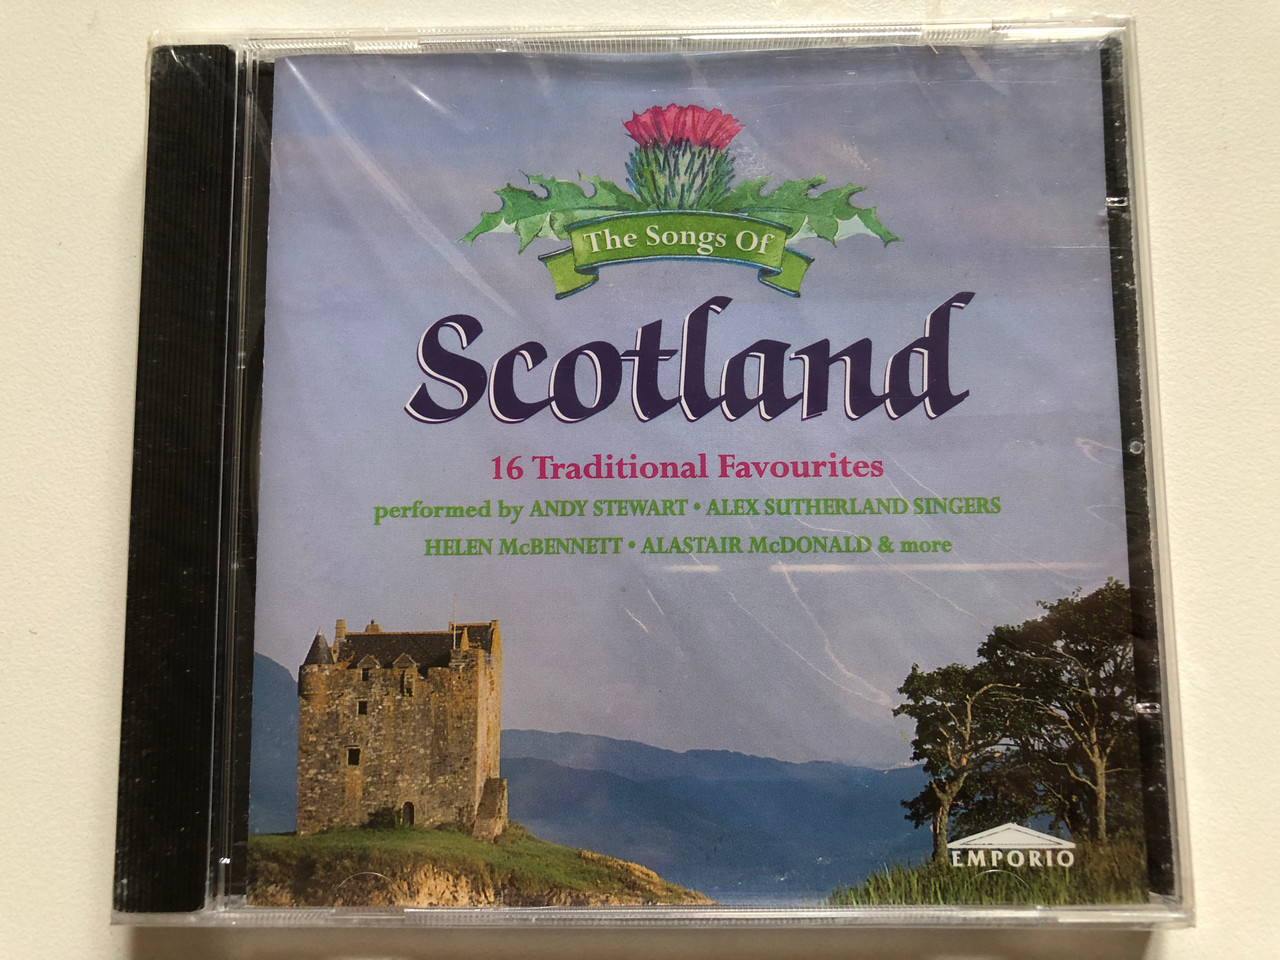 https://cdn10.bigcommerce.com/s-62bdpkt7pb/products/0/images/306061/The_Songs_Of_Scotland_-_16_Traditional_Favourites_performed_by_Andy_Stewart_Alex_Sutherland_Singers_Helen_McBenett_Alastair_McDonald_more_Emporio_Audio_CD_1995_EMPRCD590_1__32187.1698153511.1280.1280.JPG?c=2